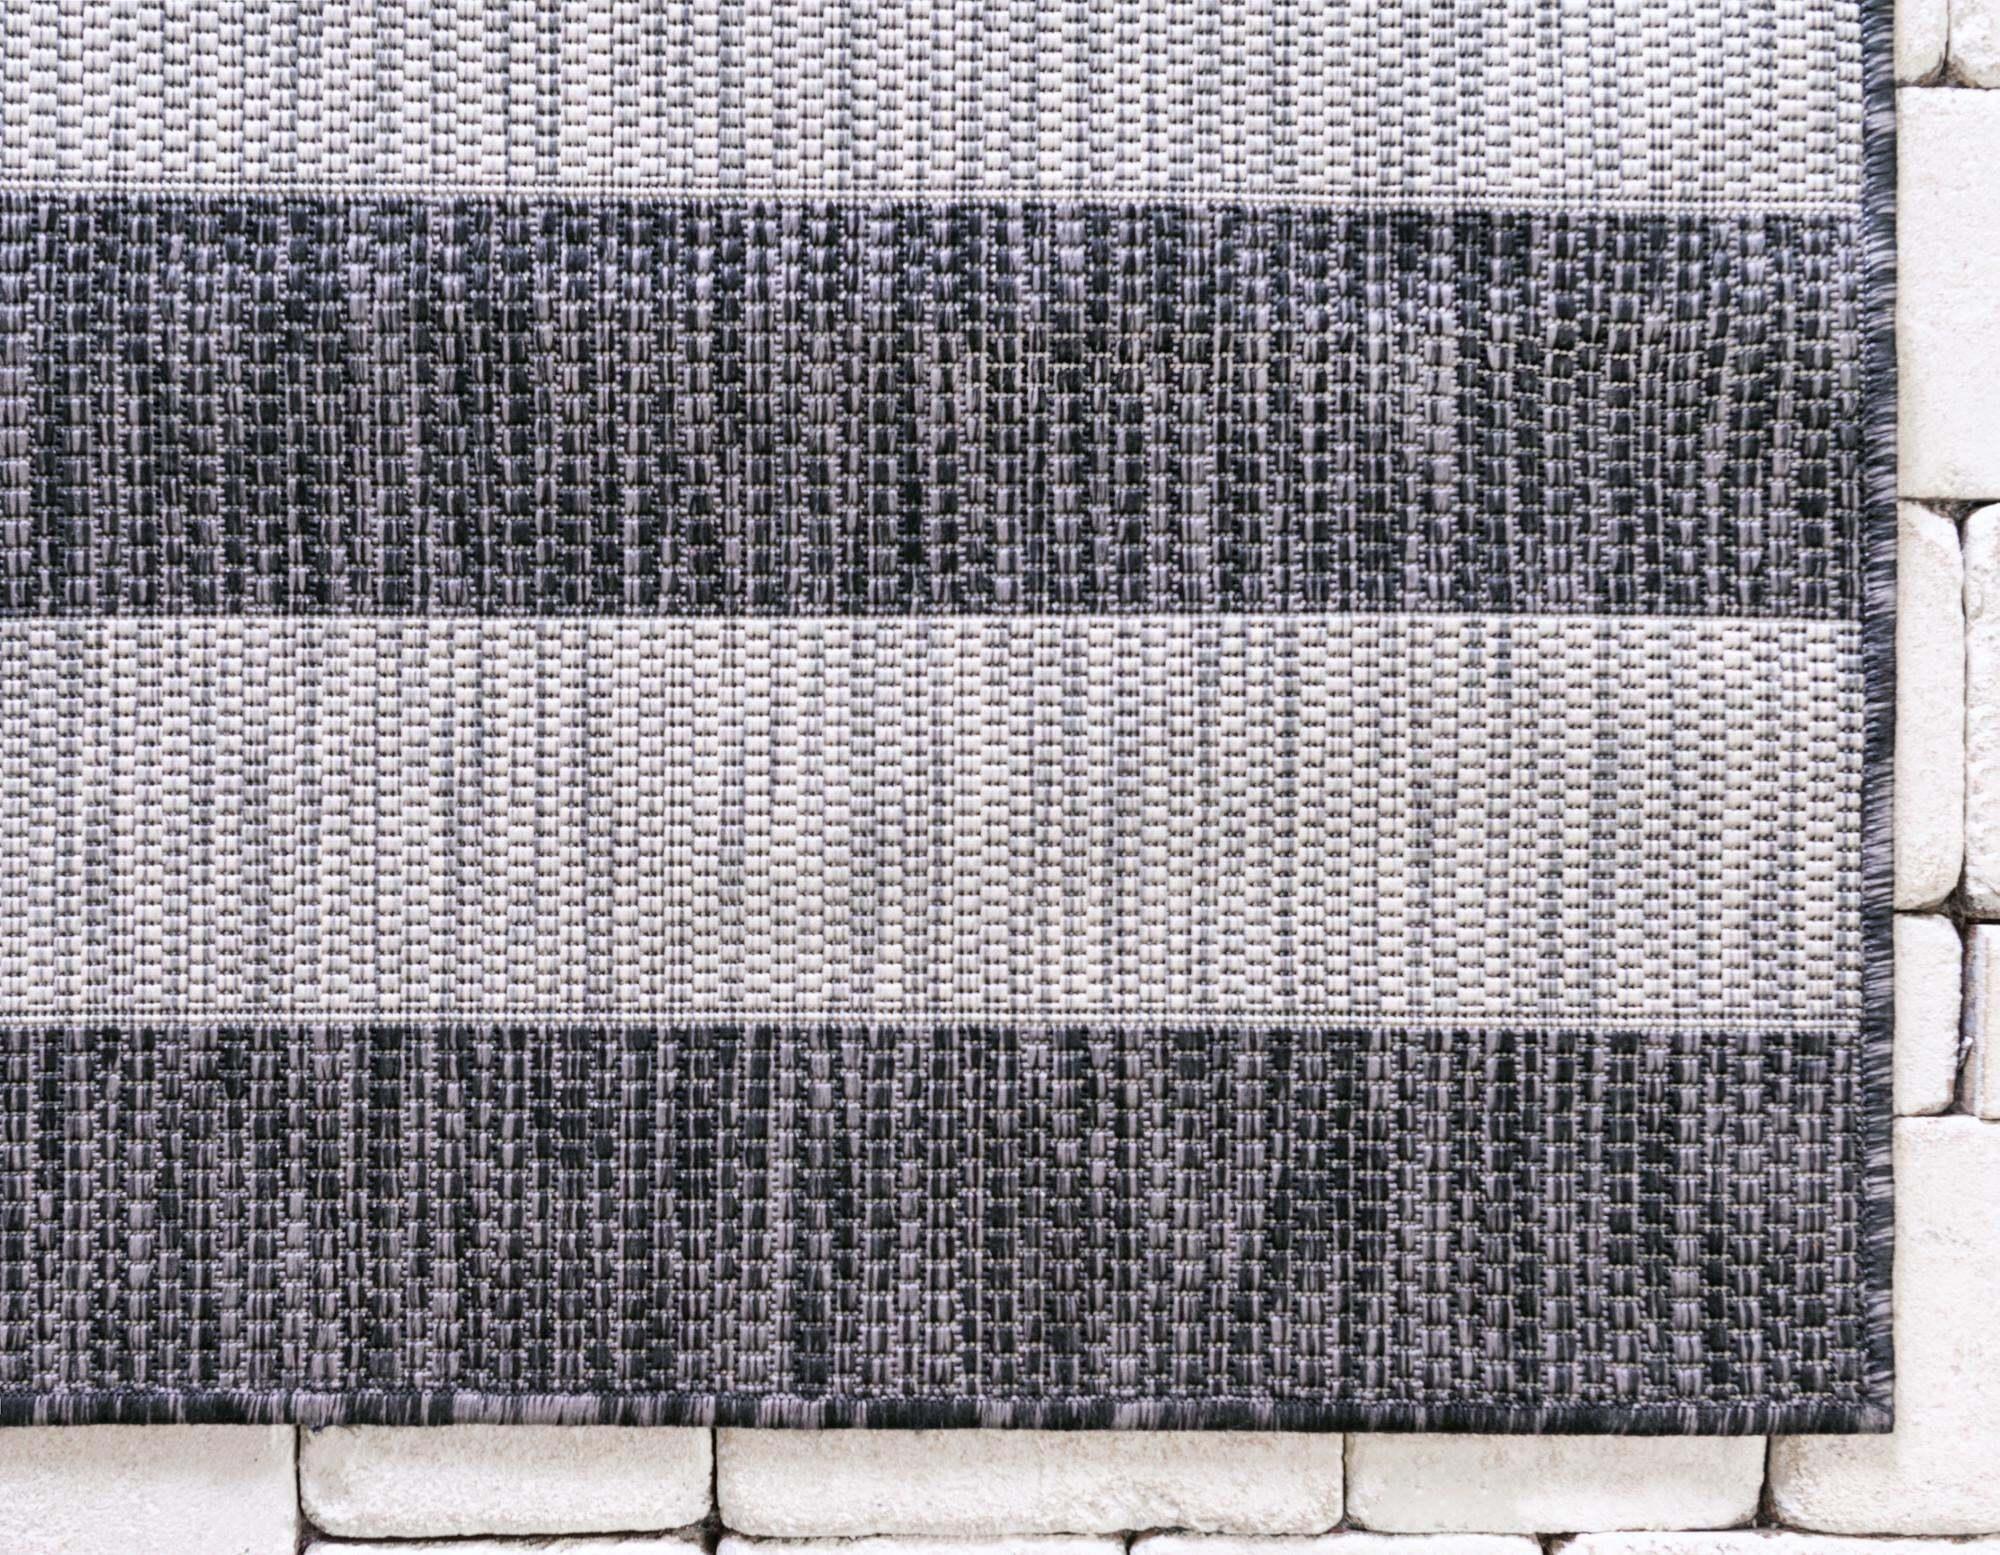 Unique Loom Outdoor Rugs - Outdoor Striped Striped Rectangular 9x12 Rug Gray & Black